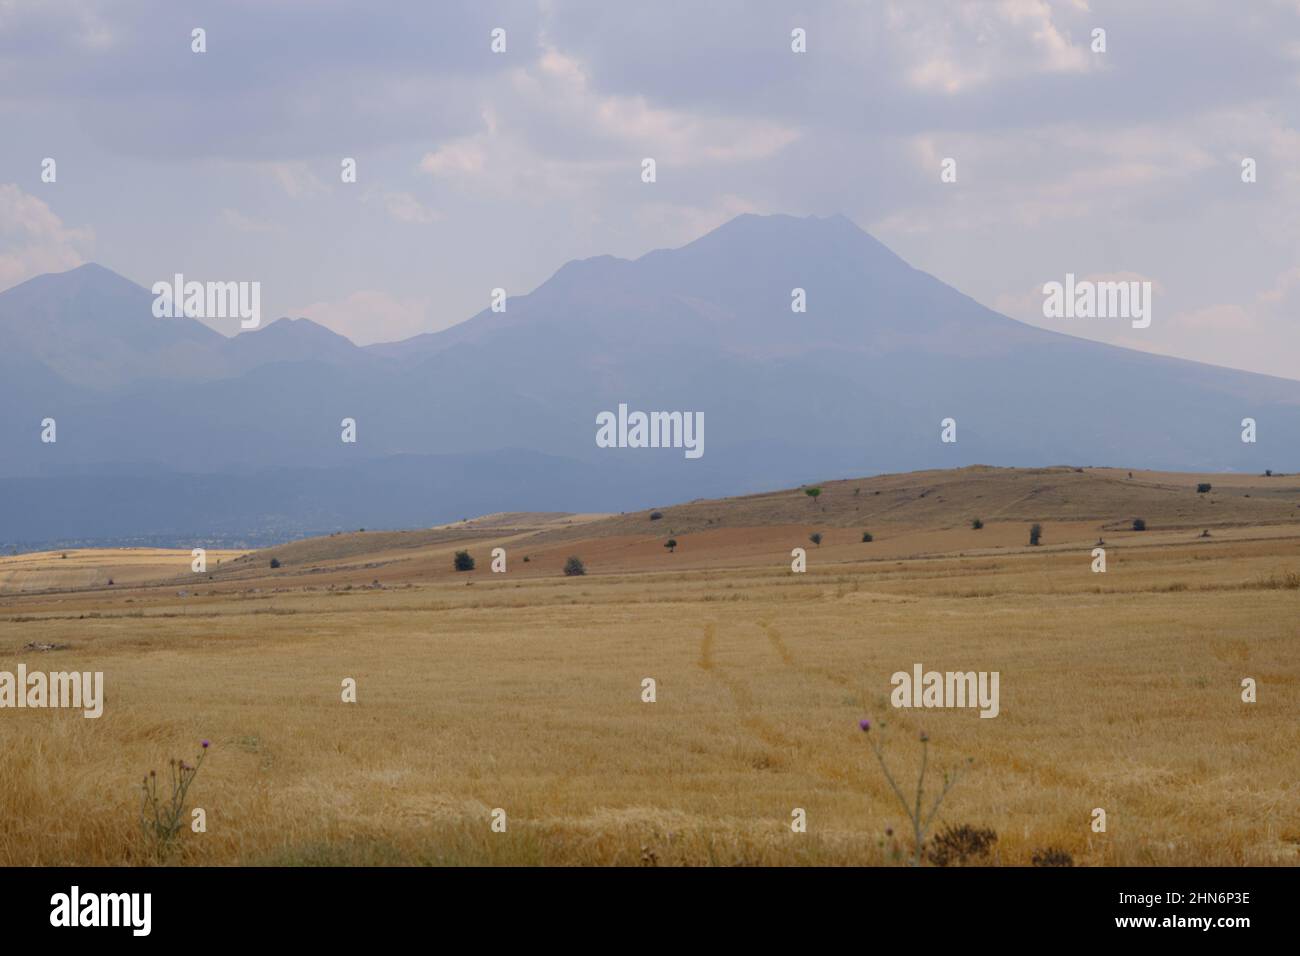 Huge mountain background, hasan mountain local name is hasan dagi background of agricultural field, field of wheat area. Stock Photo